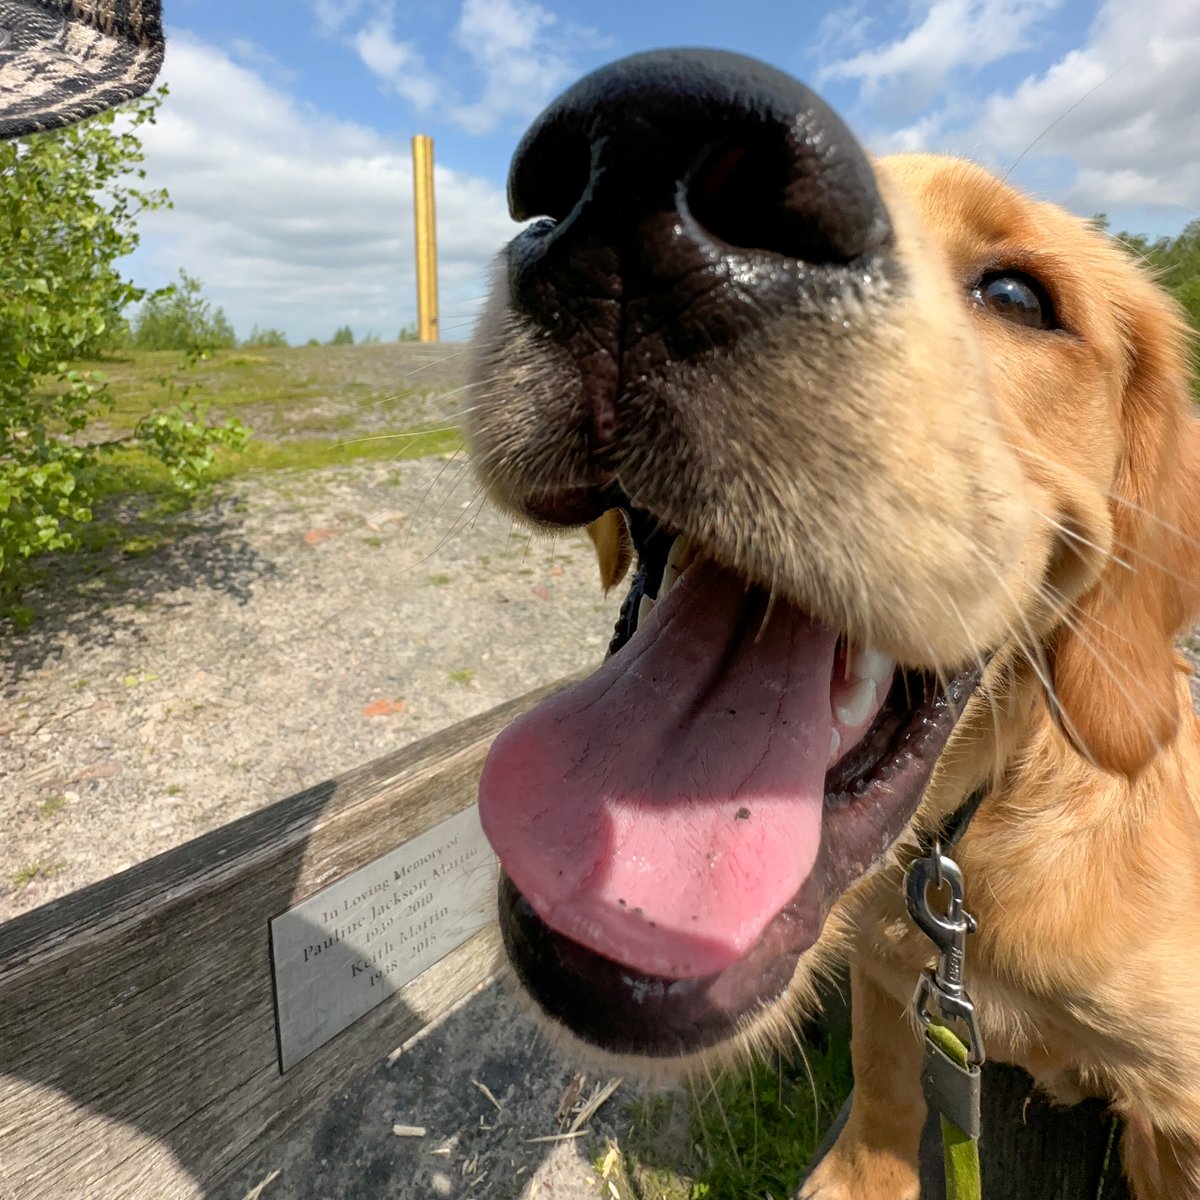 Finlay with #TheGoldenTowerOfLeaves in the background at #PooleyCountryPark. #goldenretriever #redmoonshine #puppyphotos #countrywalks #goldleaf #doglife #puppylife #countrypark #foxred #foxredretriever #dogsoftwitter #tongueouttuesday